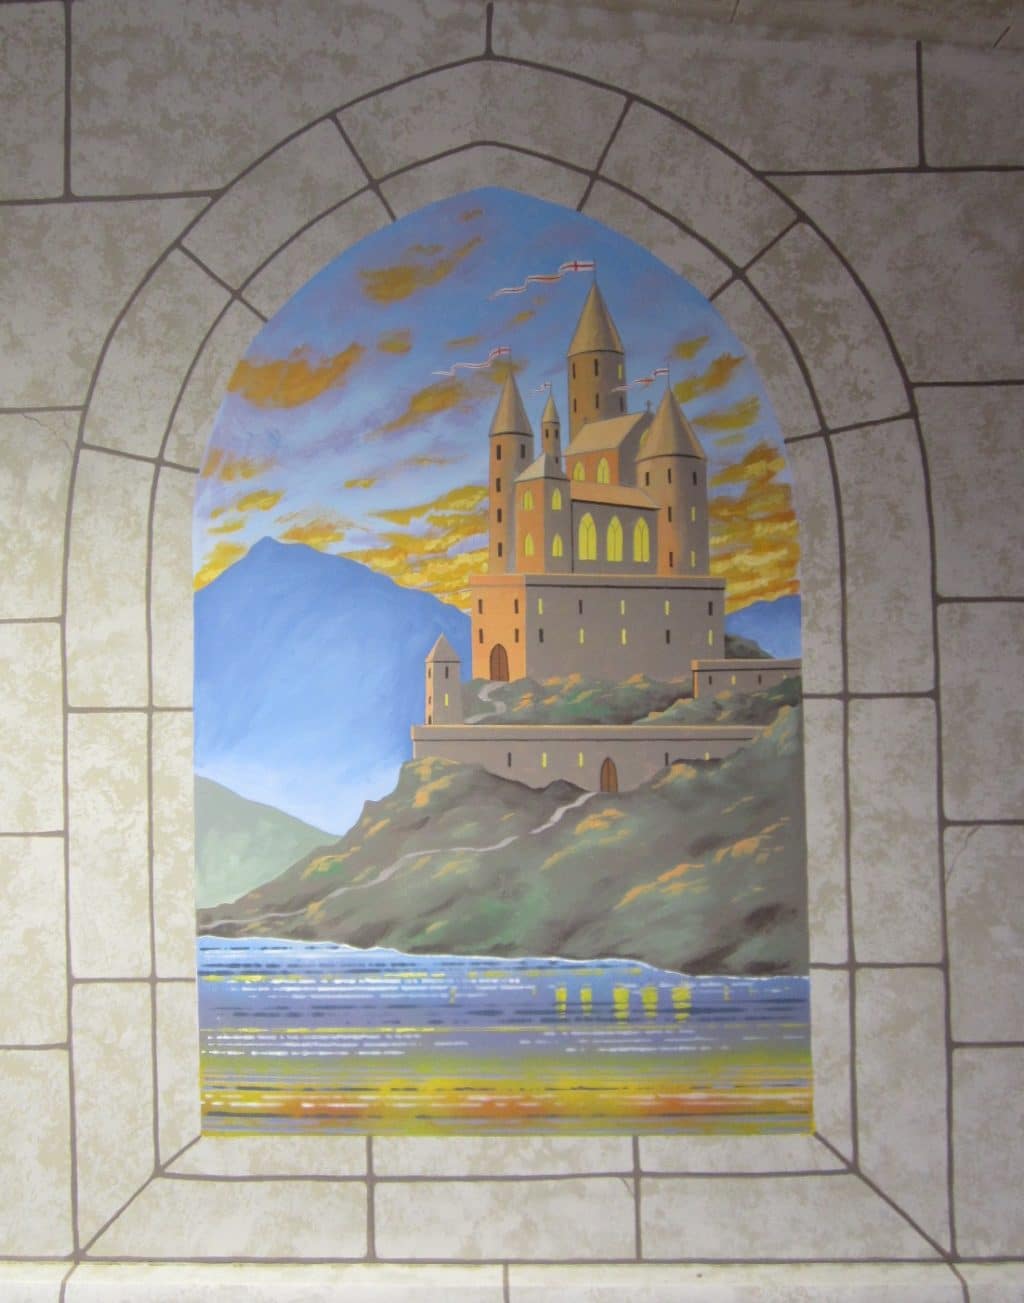 commissions-mural-gallery-castle (5)